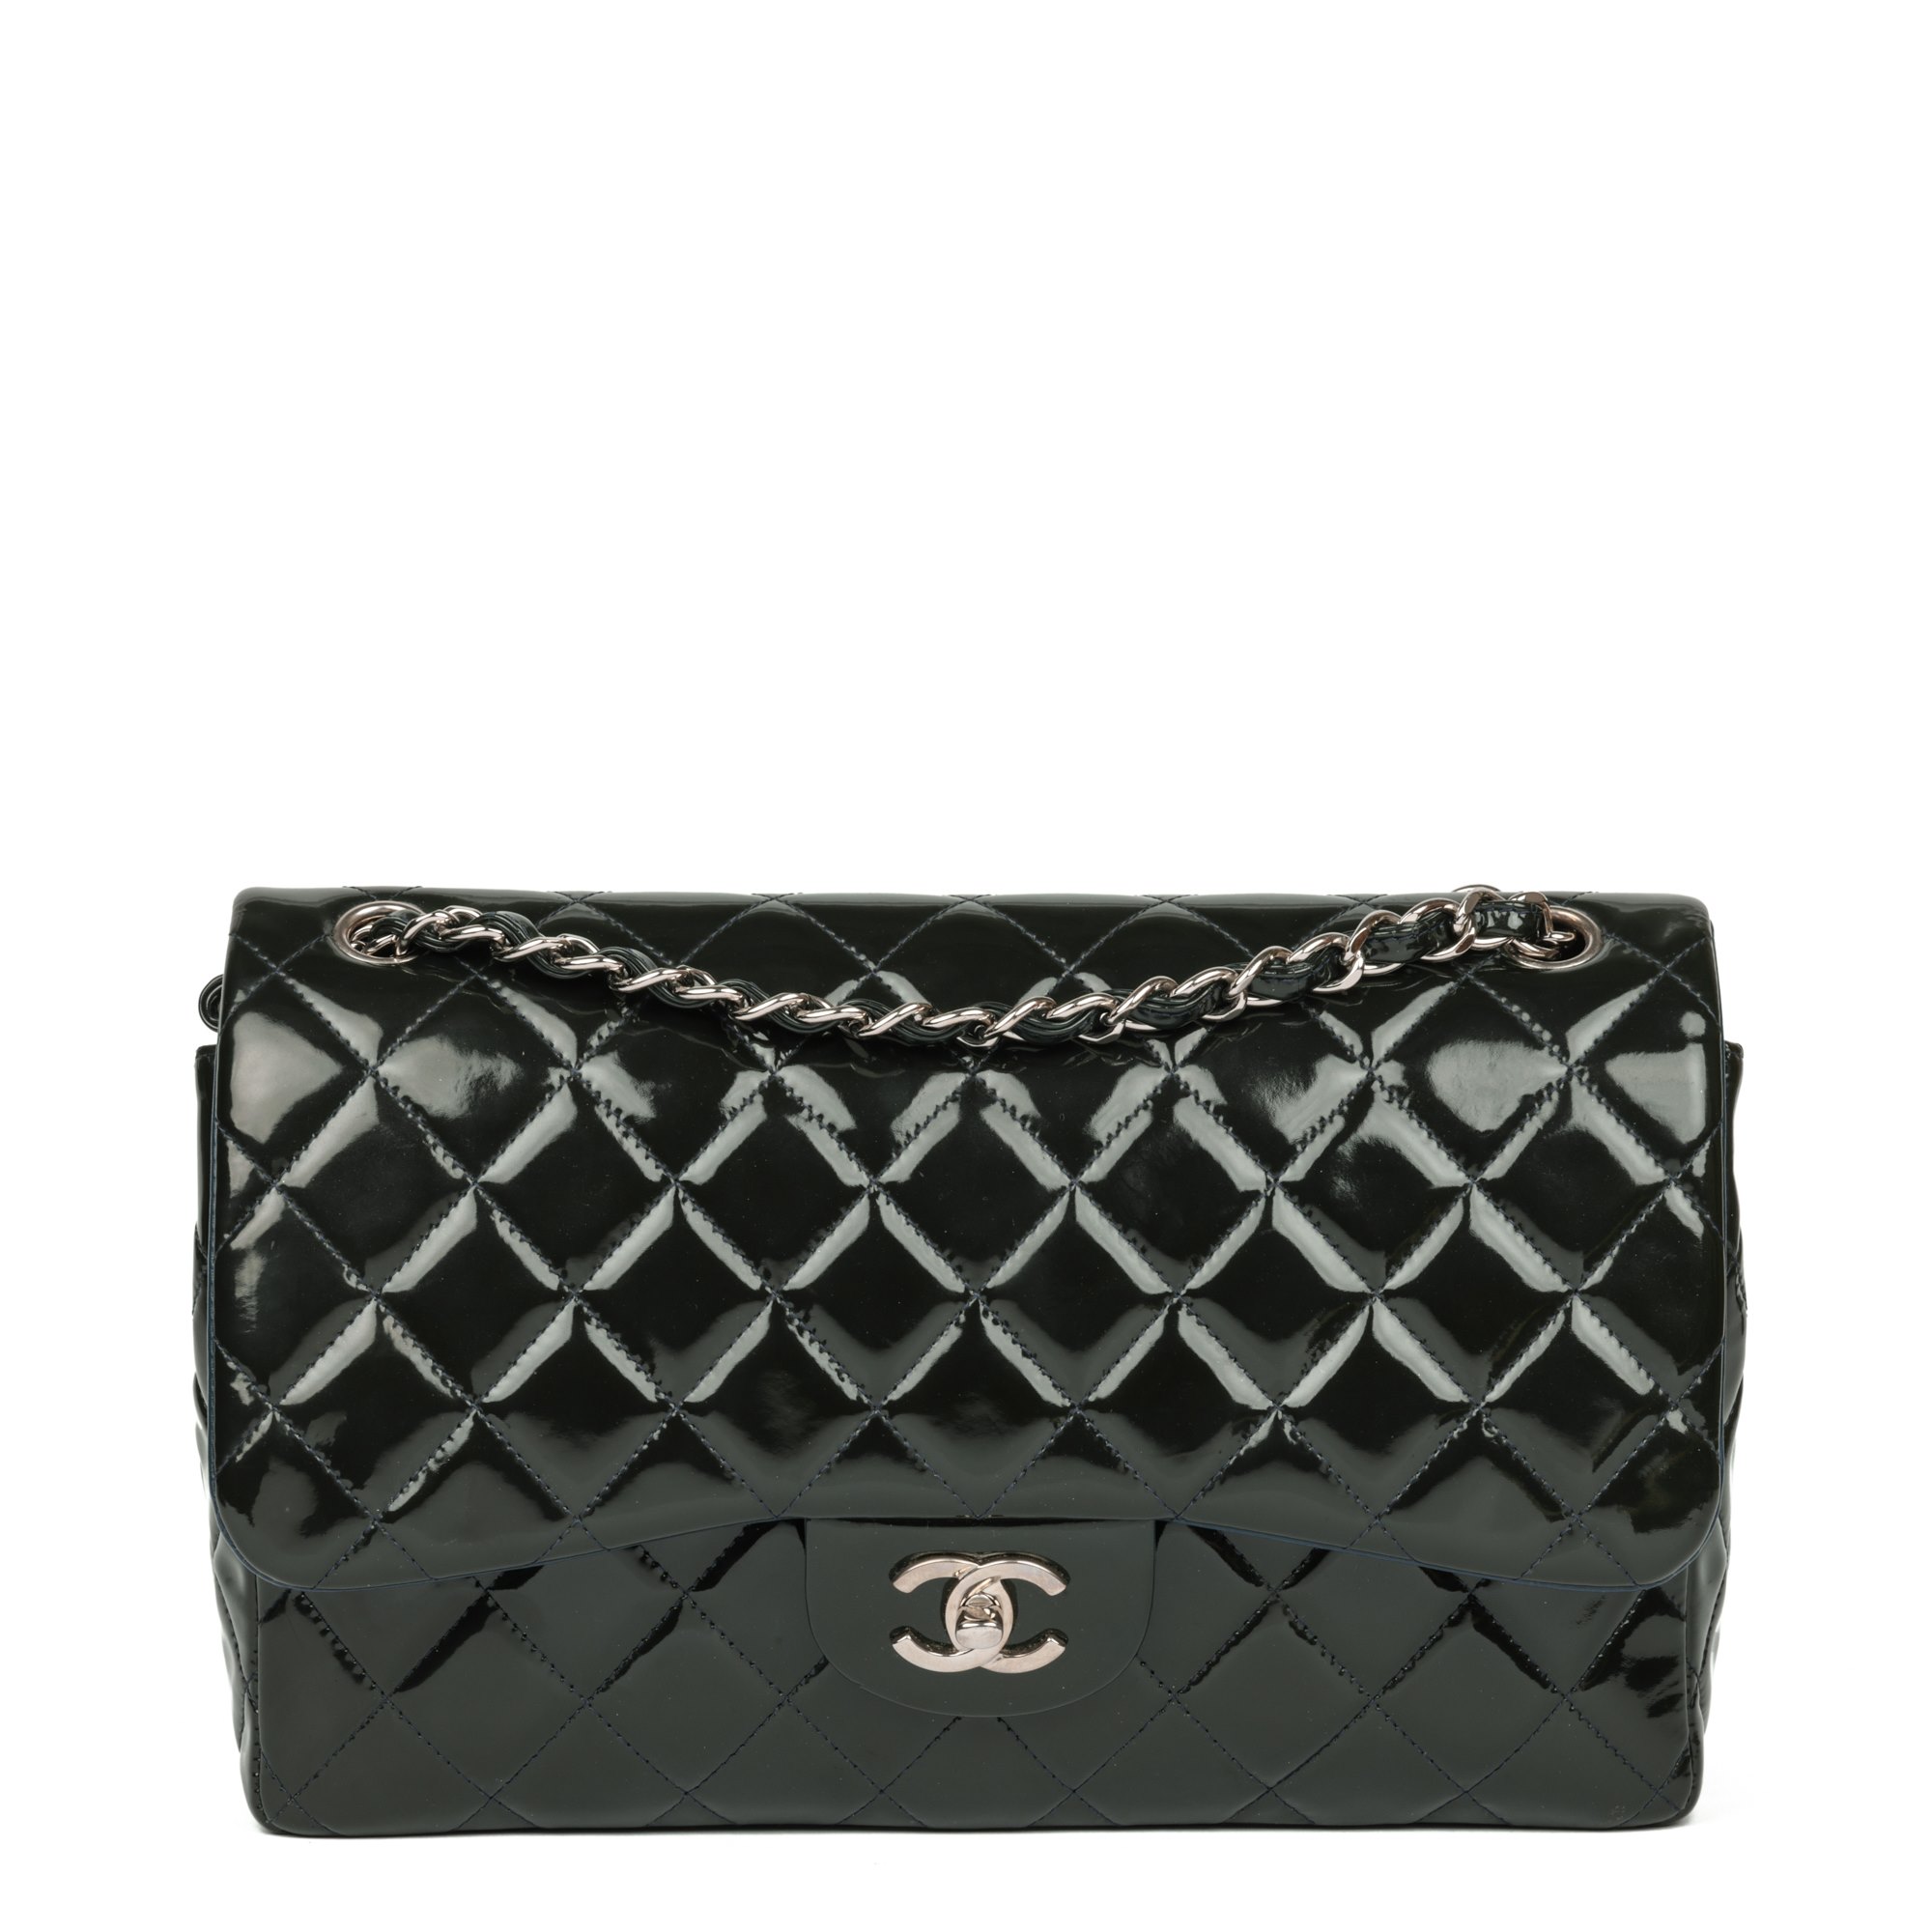 Chanel Forest Green Quilted Patent Leather Verso Classic Double Flap Bag